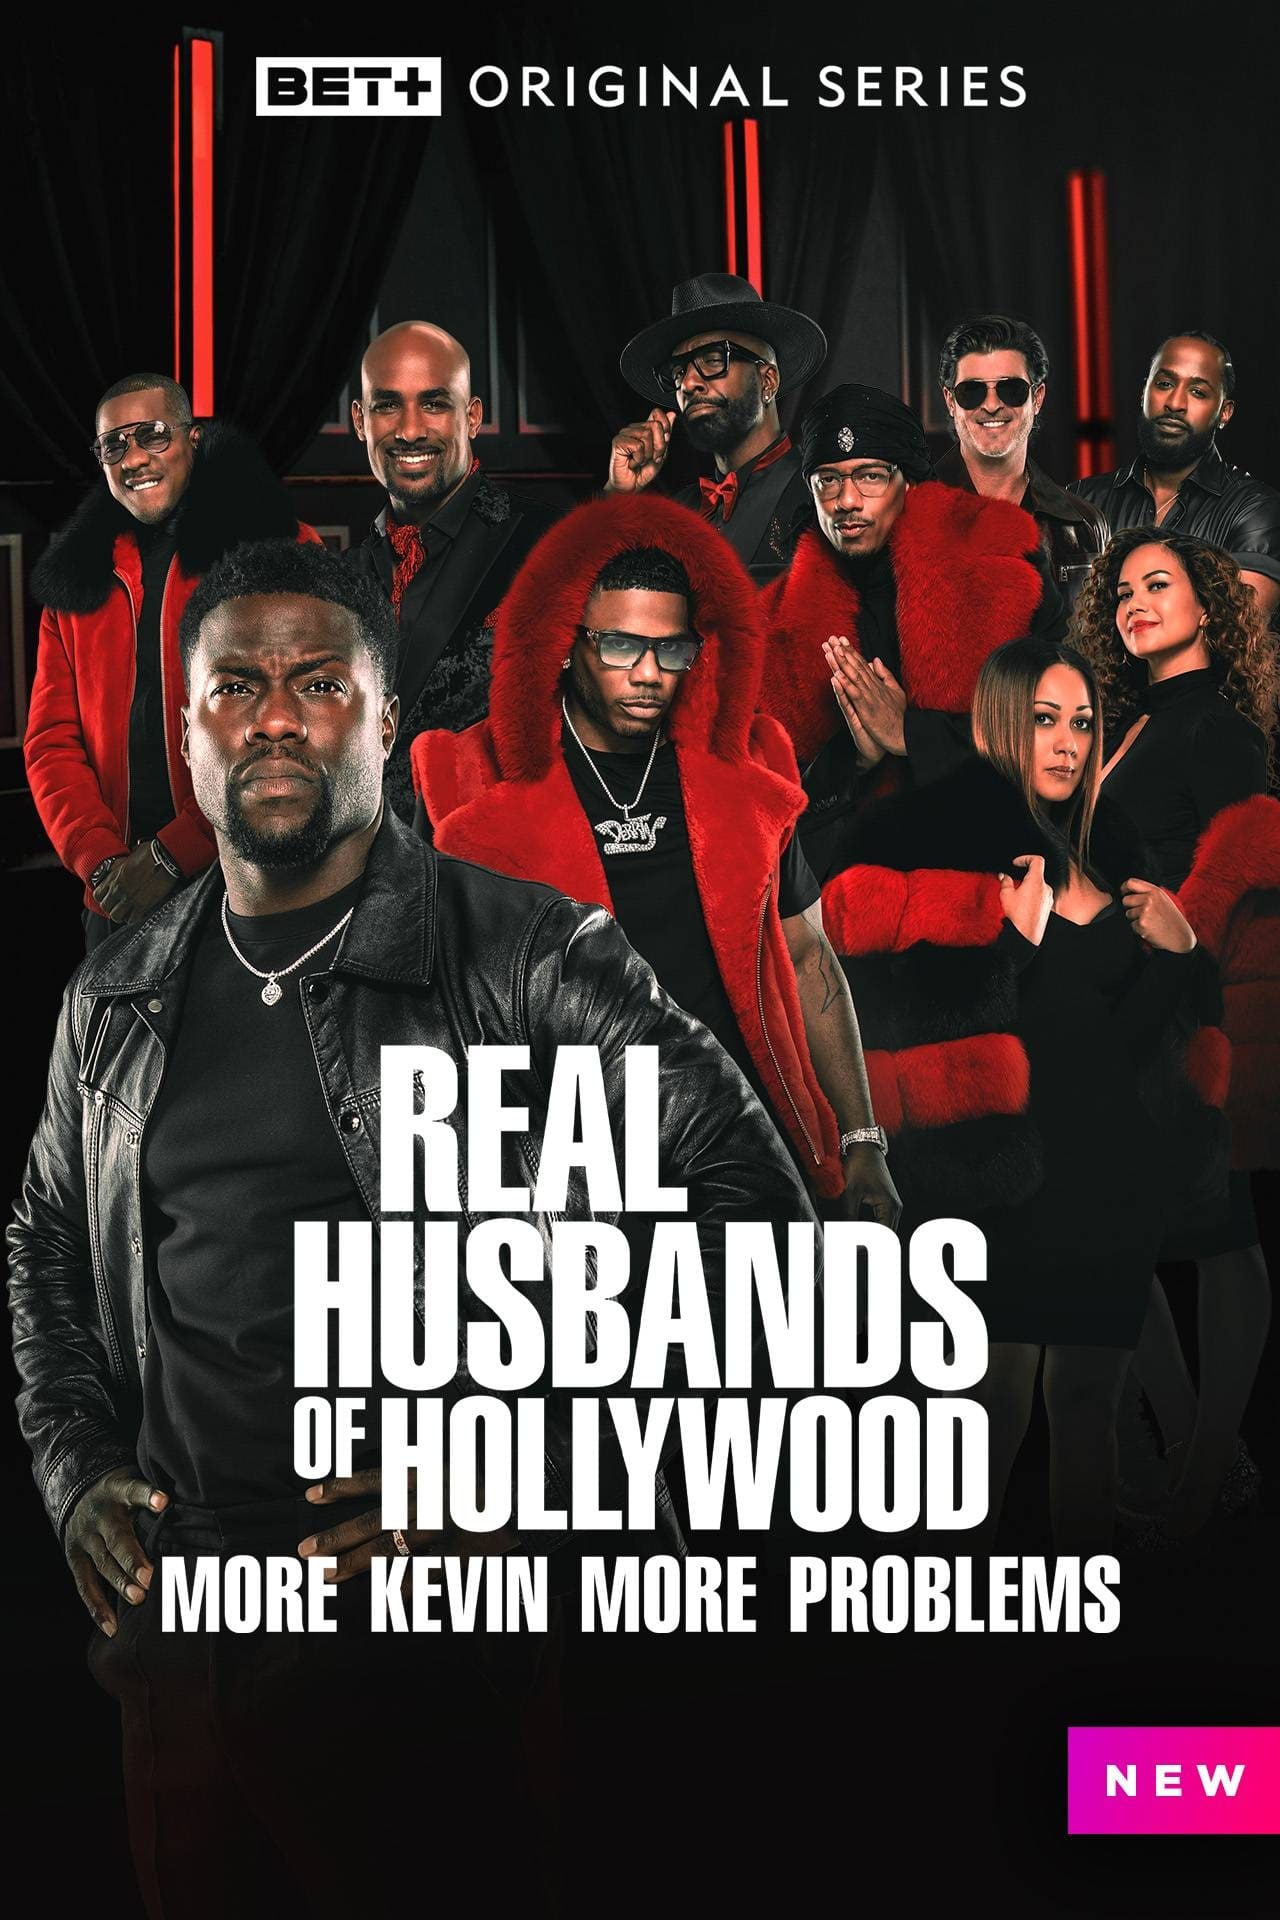 Real Husbands of Hollywood: More Kevin More Problems